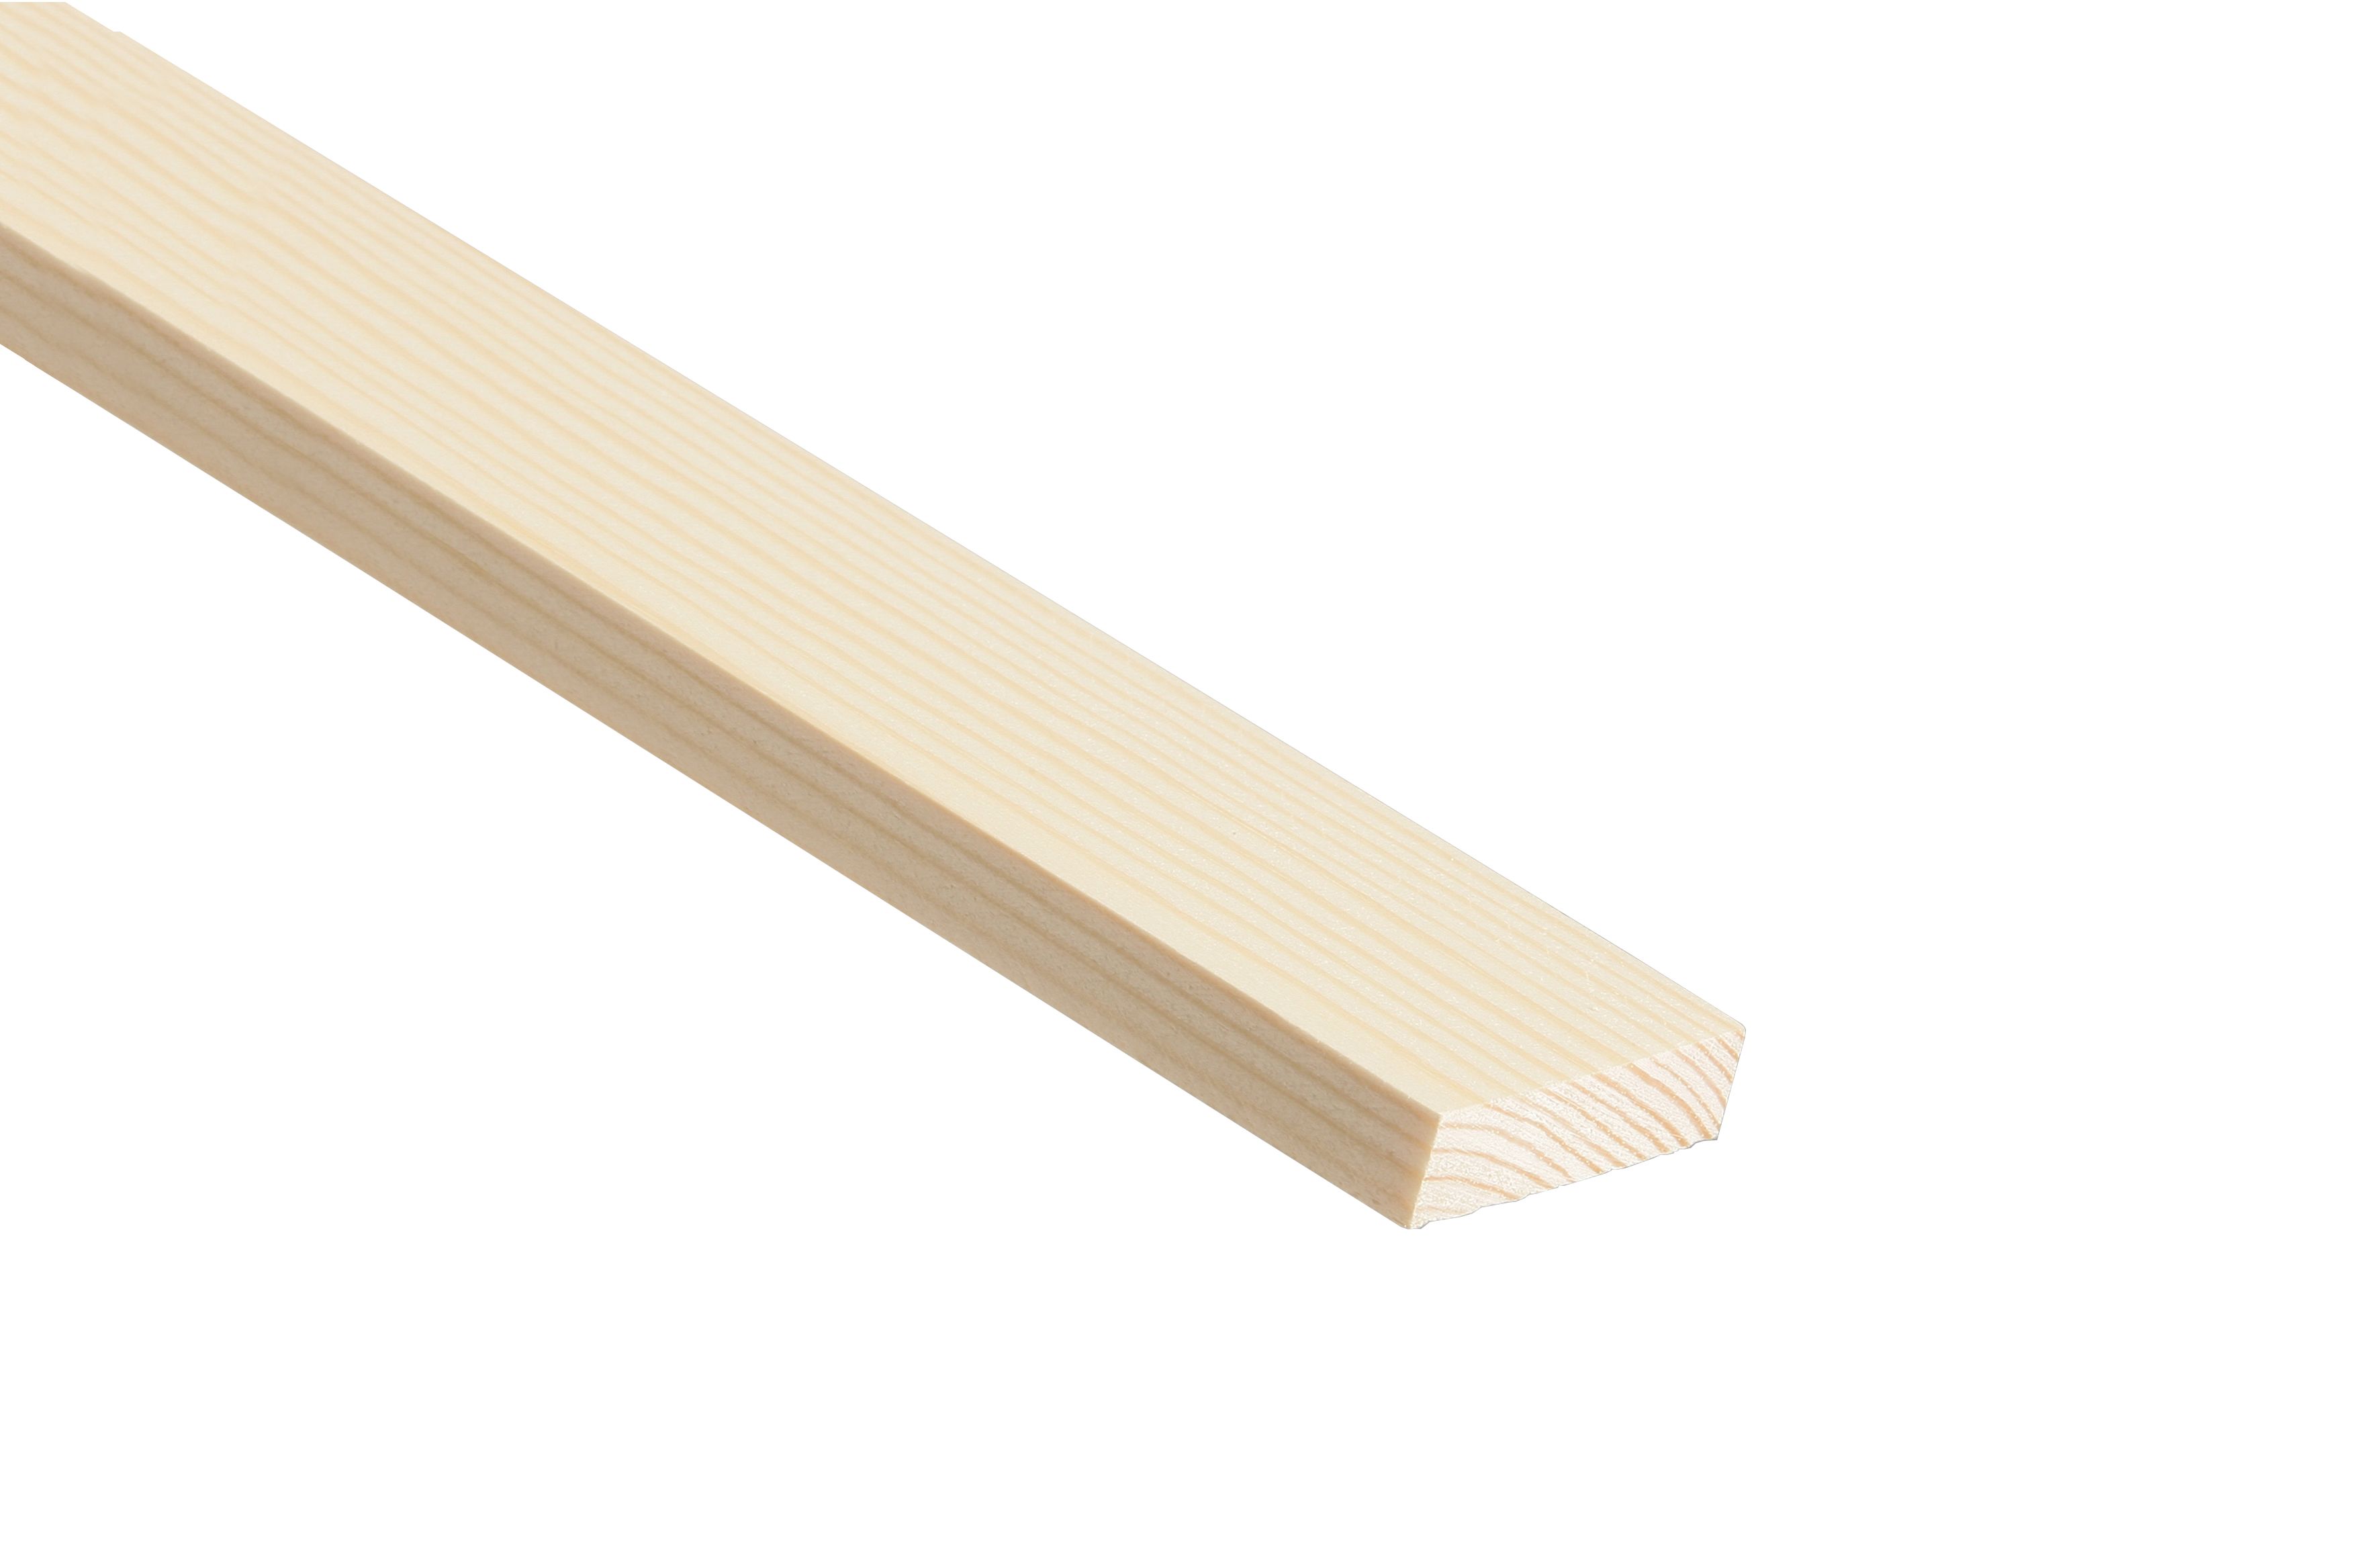 Image of Wickes Pine Stripwood Moulding (PSE) - 10 x 44 x 2400mm